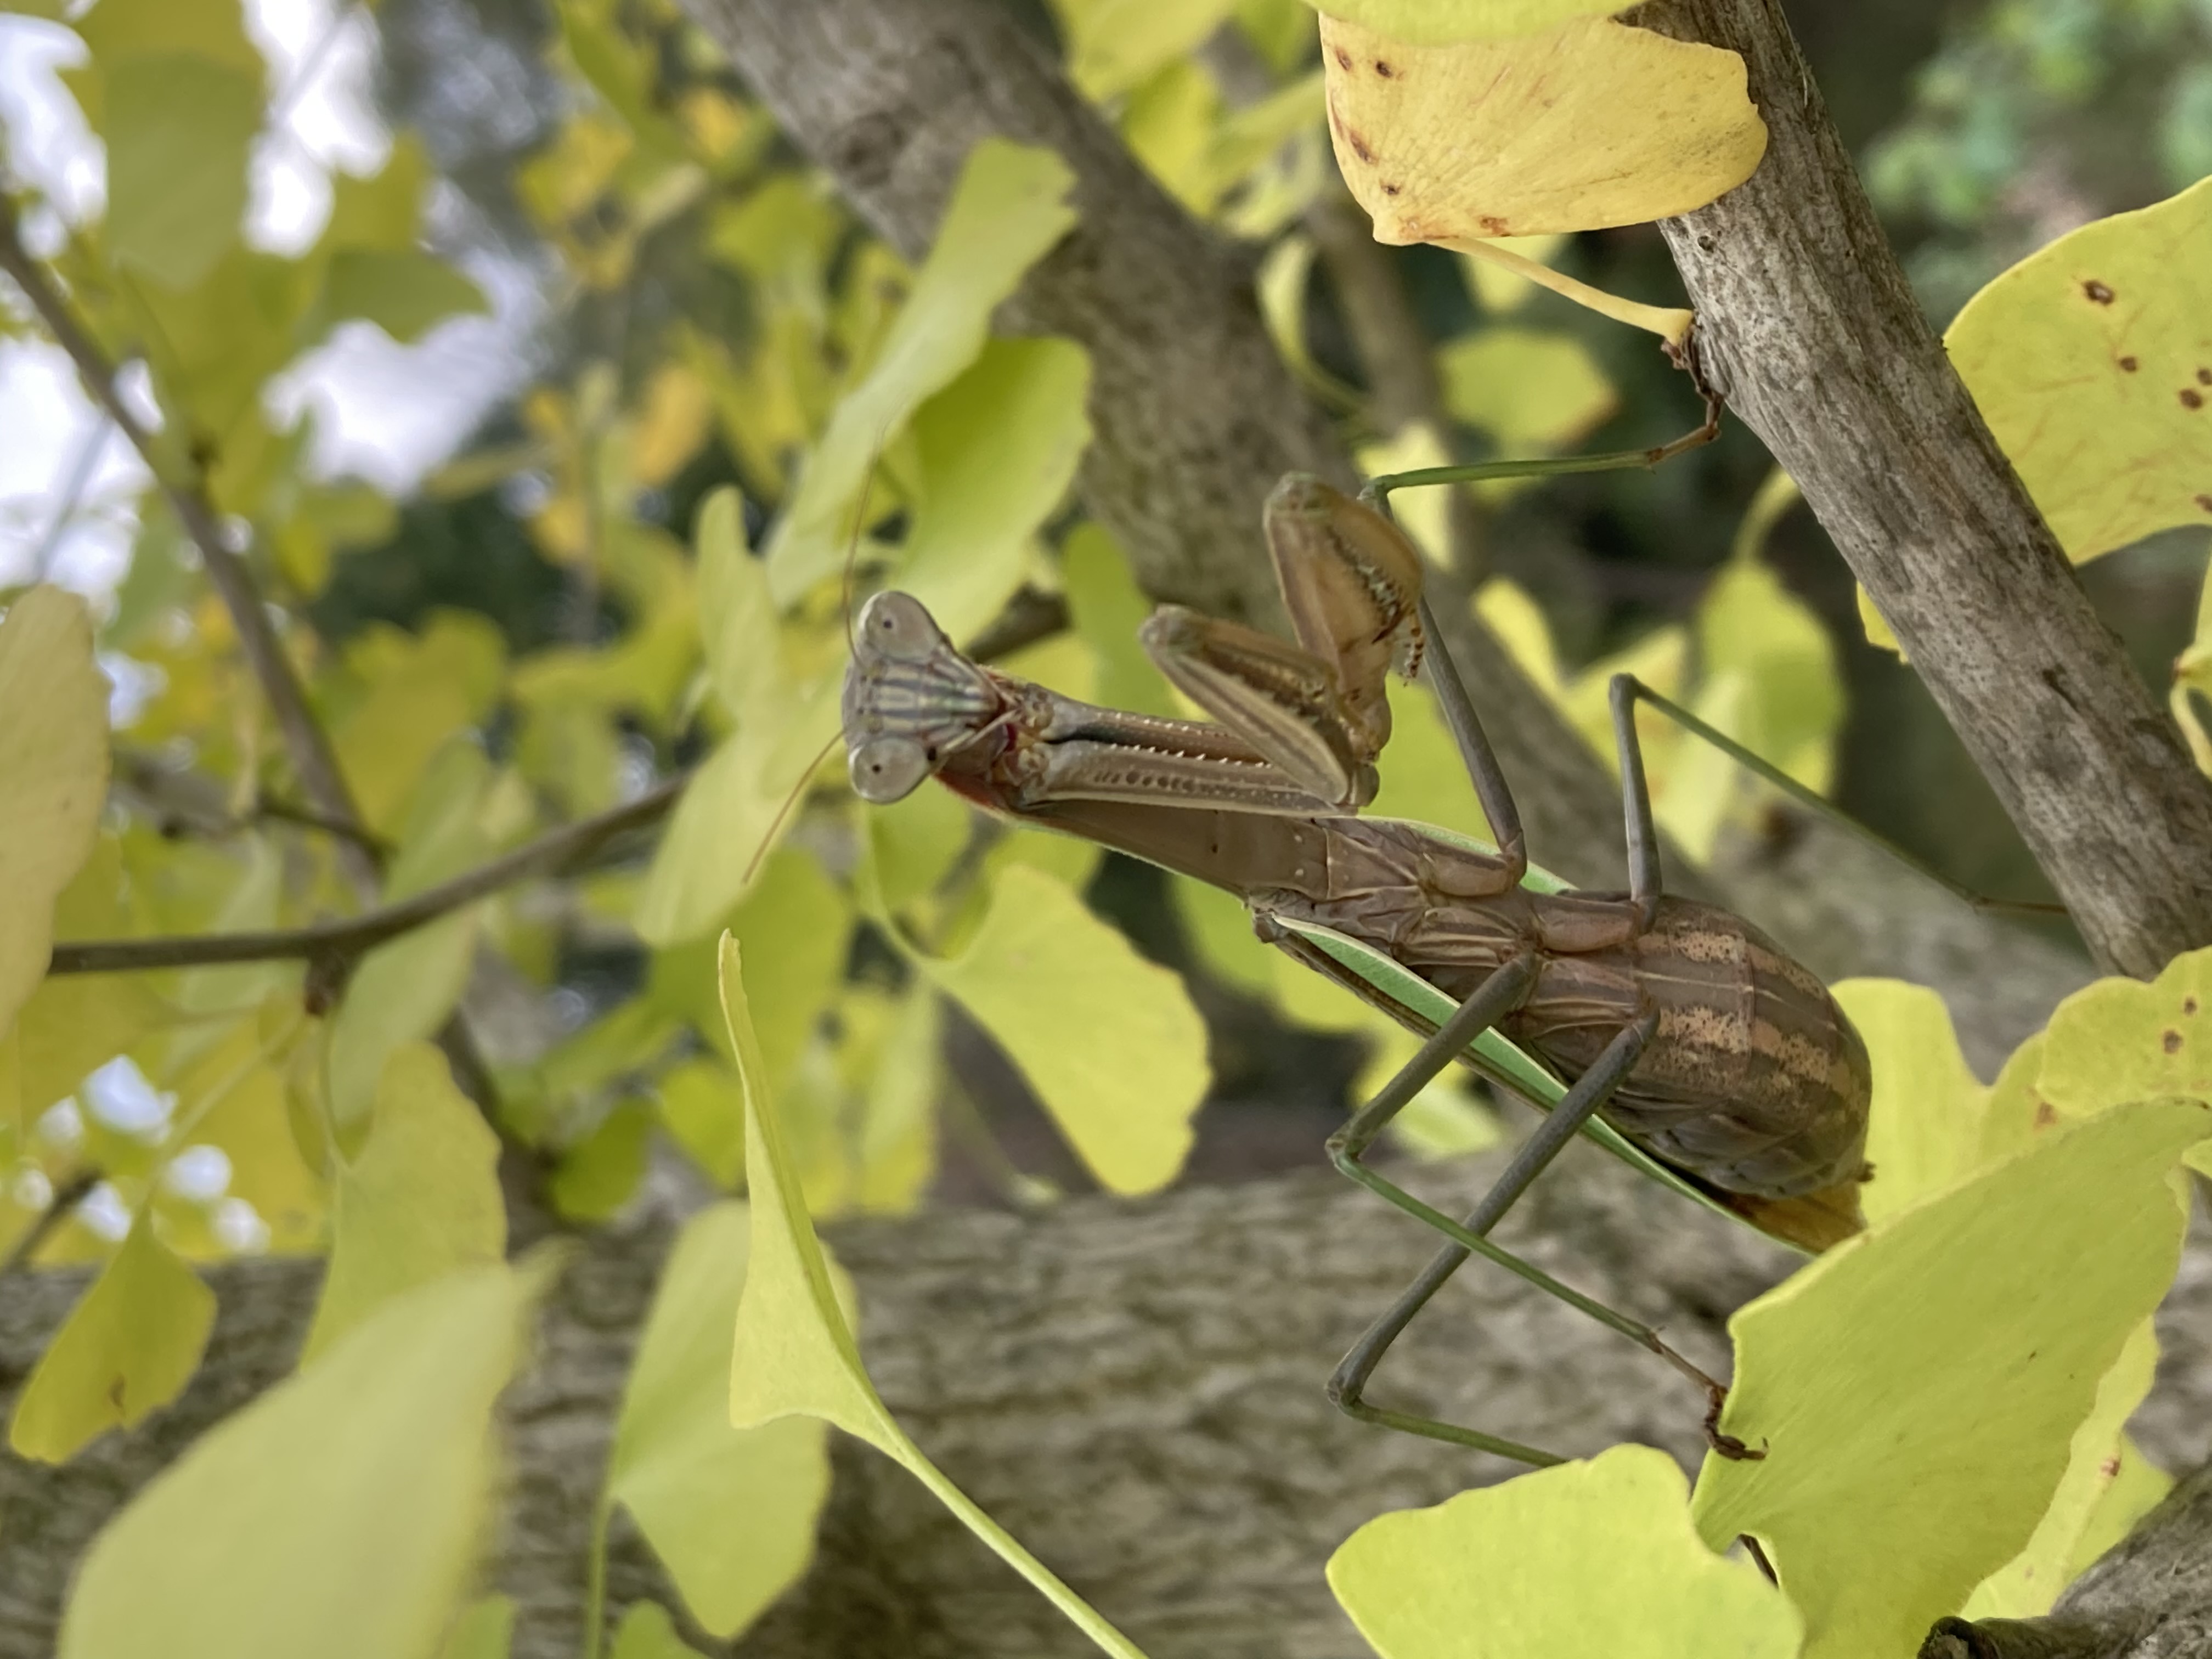 a green and brown praying mantis standing in a tree and looking at the camera. its right feet cling to a leaf while its left feet rest on a branch.